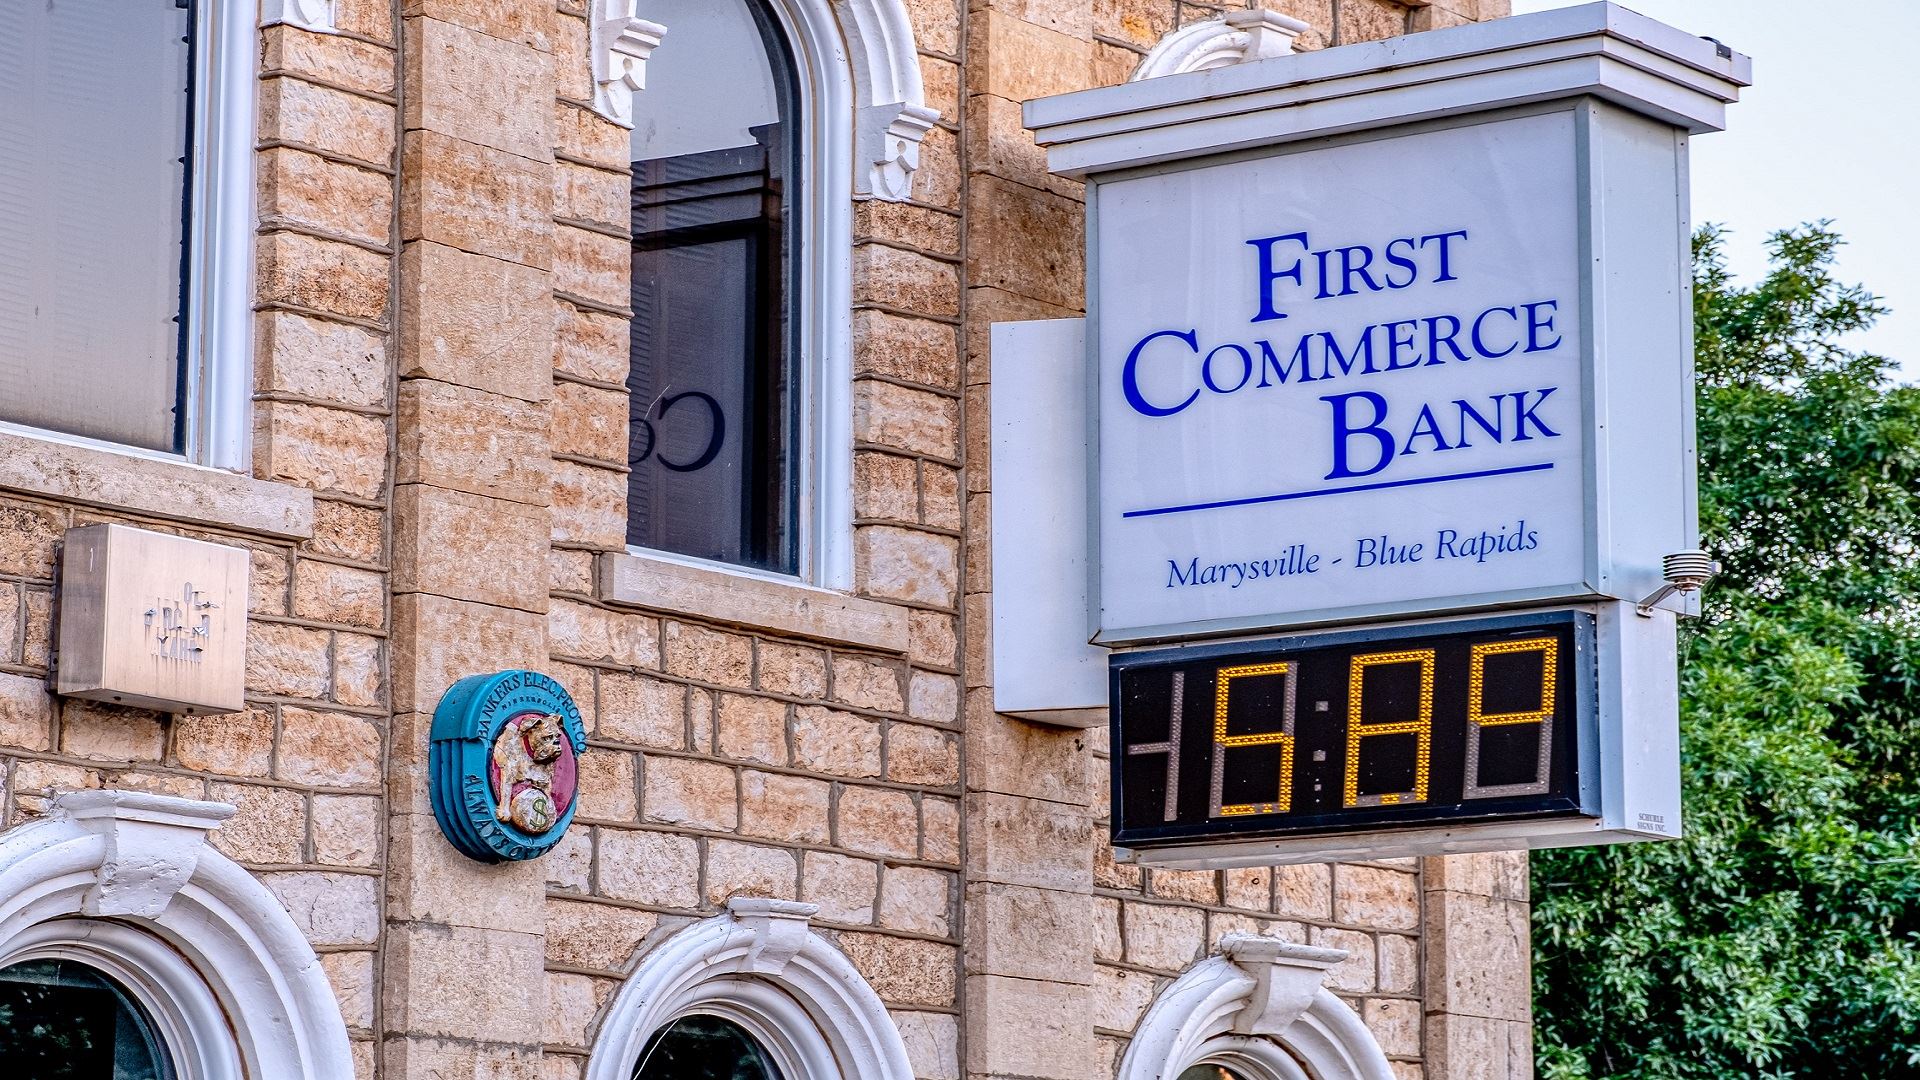 First Commerce Bank building and sign